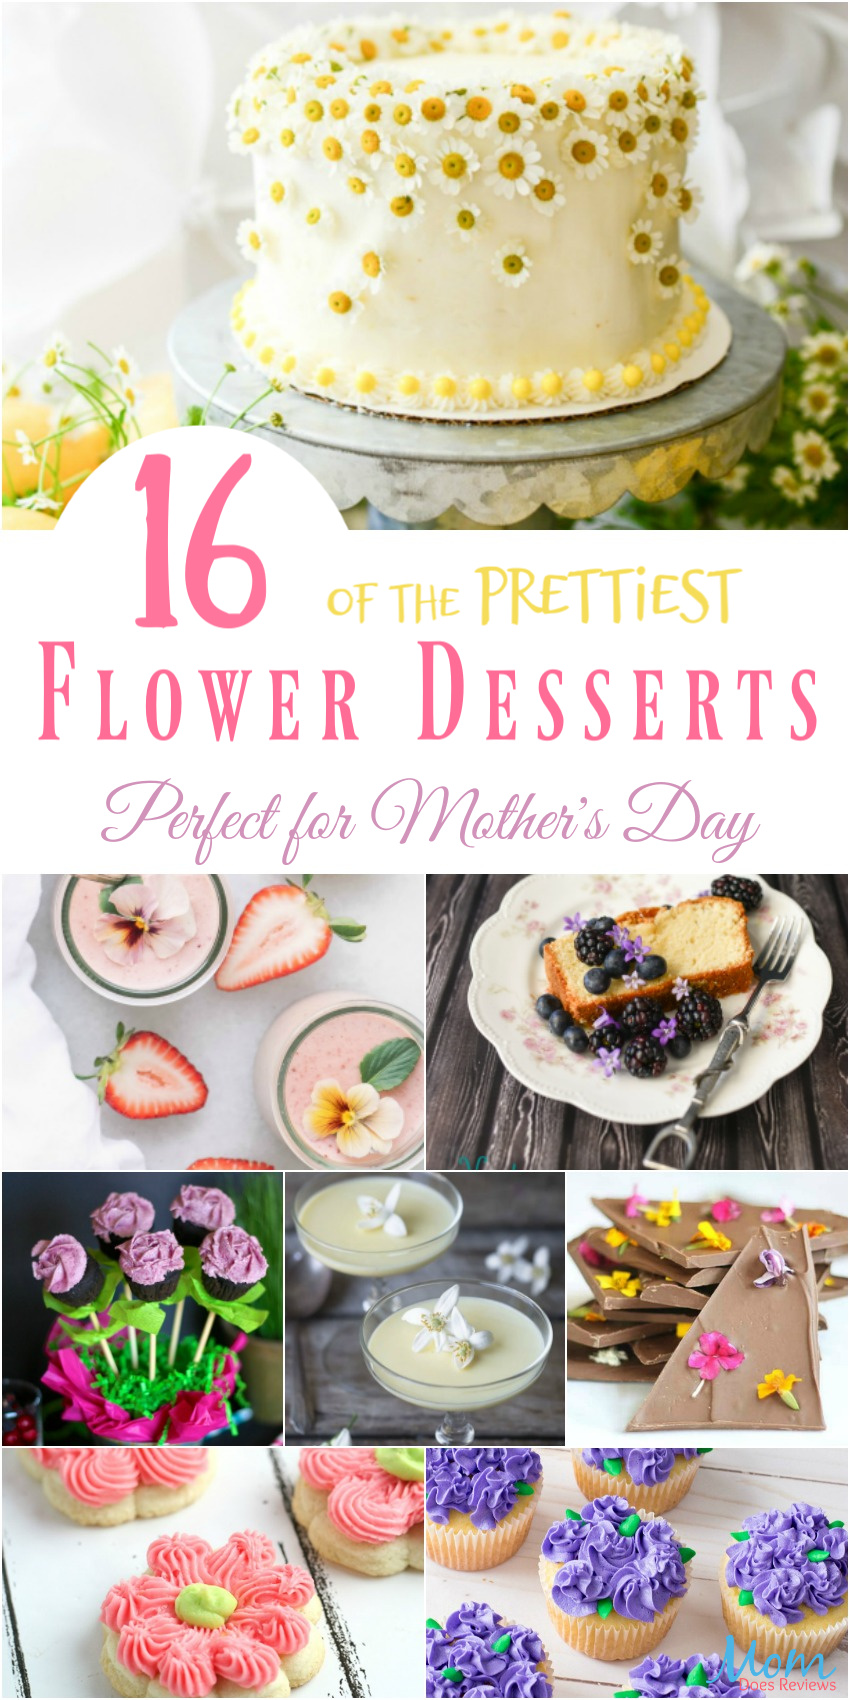 16 of the Prettiest Flower Desserts Perfect for Mother's Day #desserts #recipes #sweets #flowers #mothersday